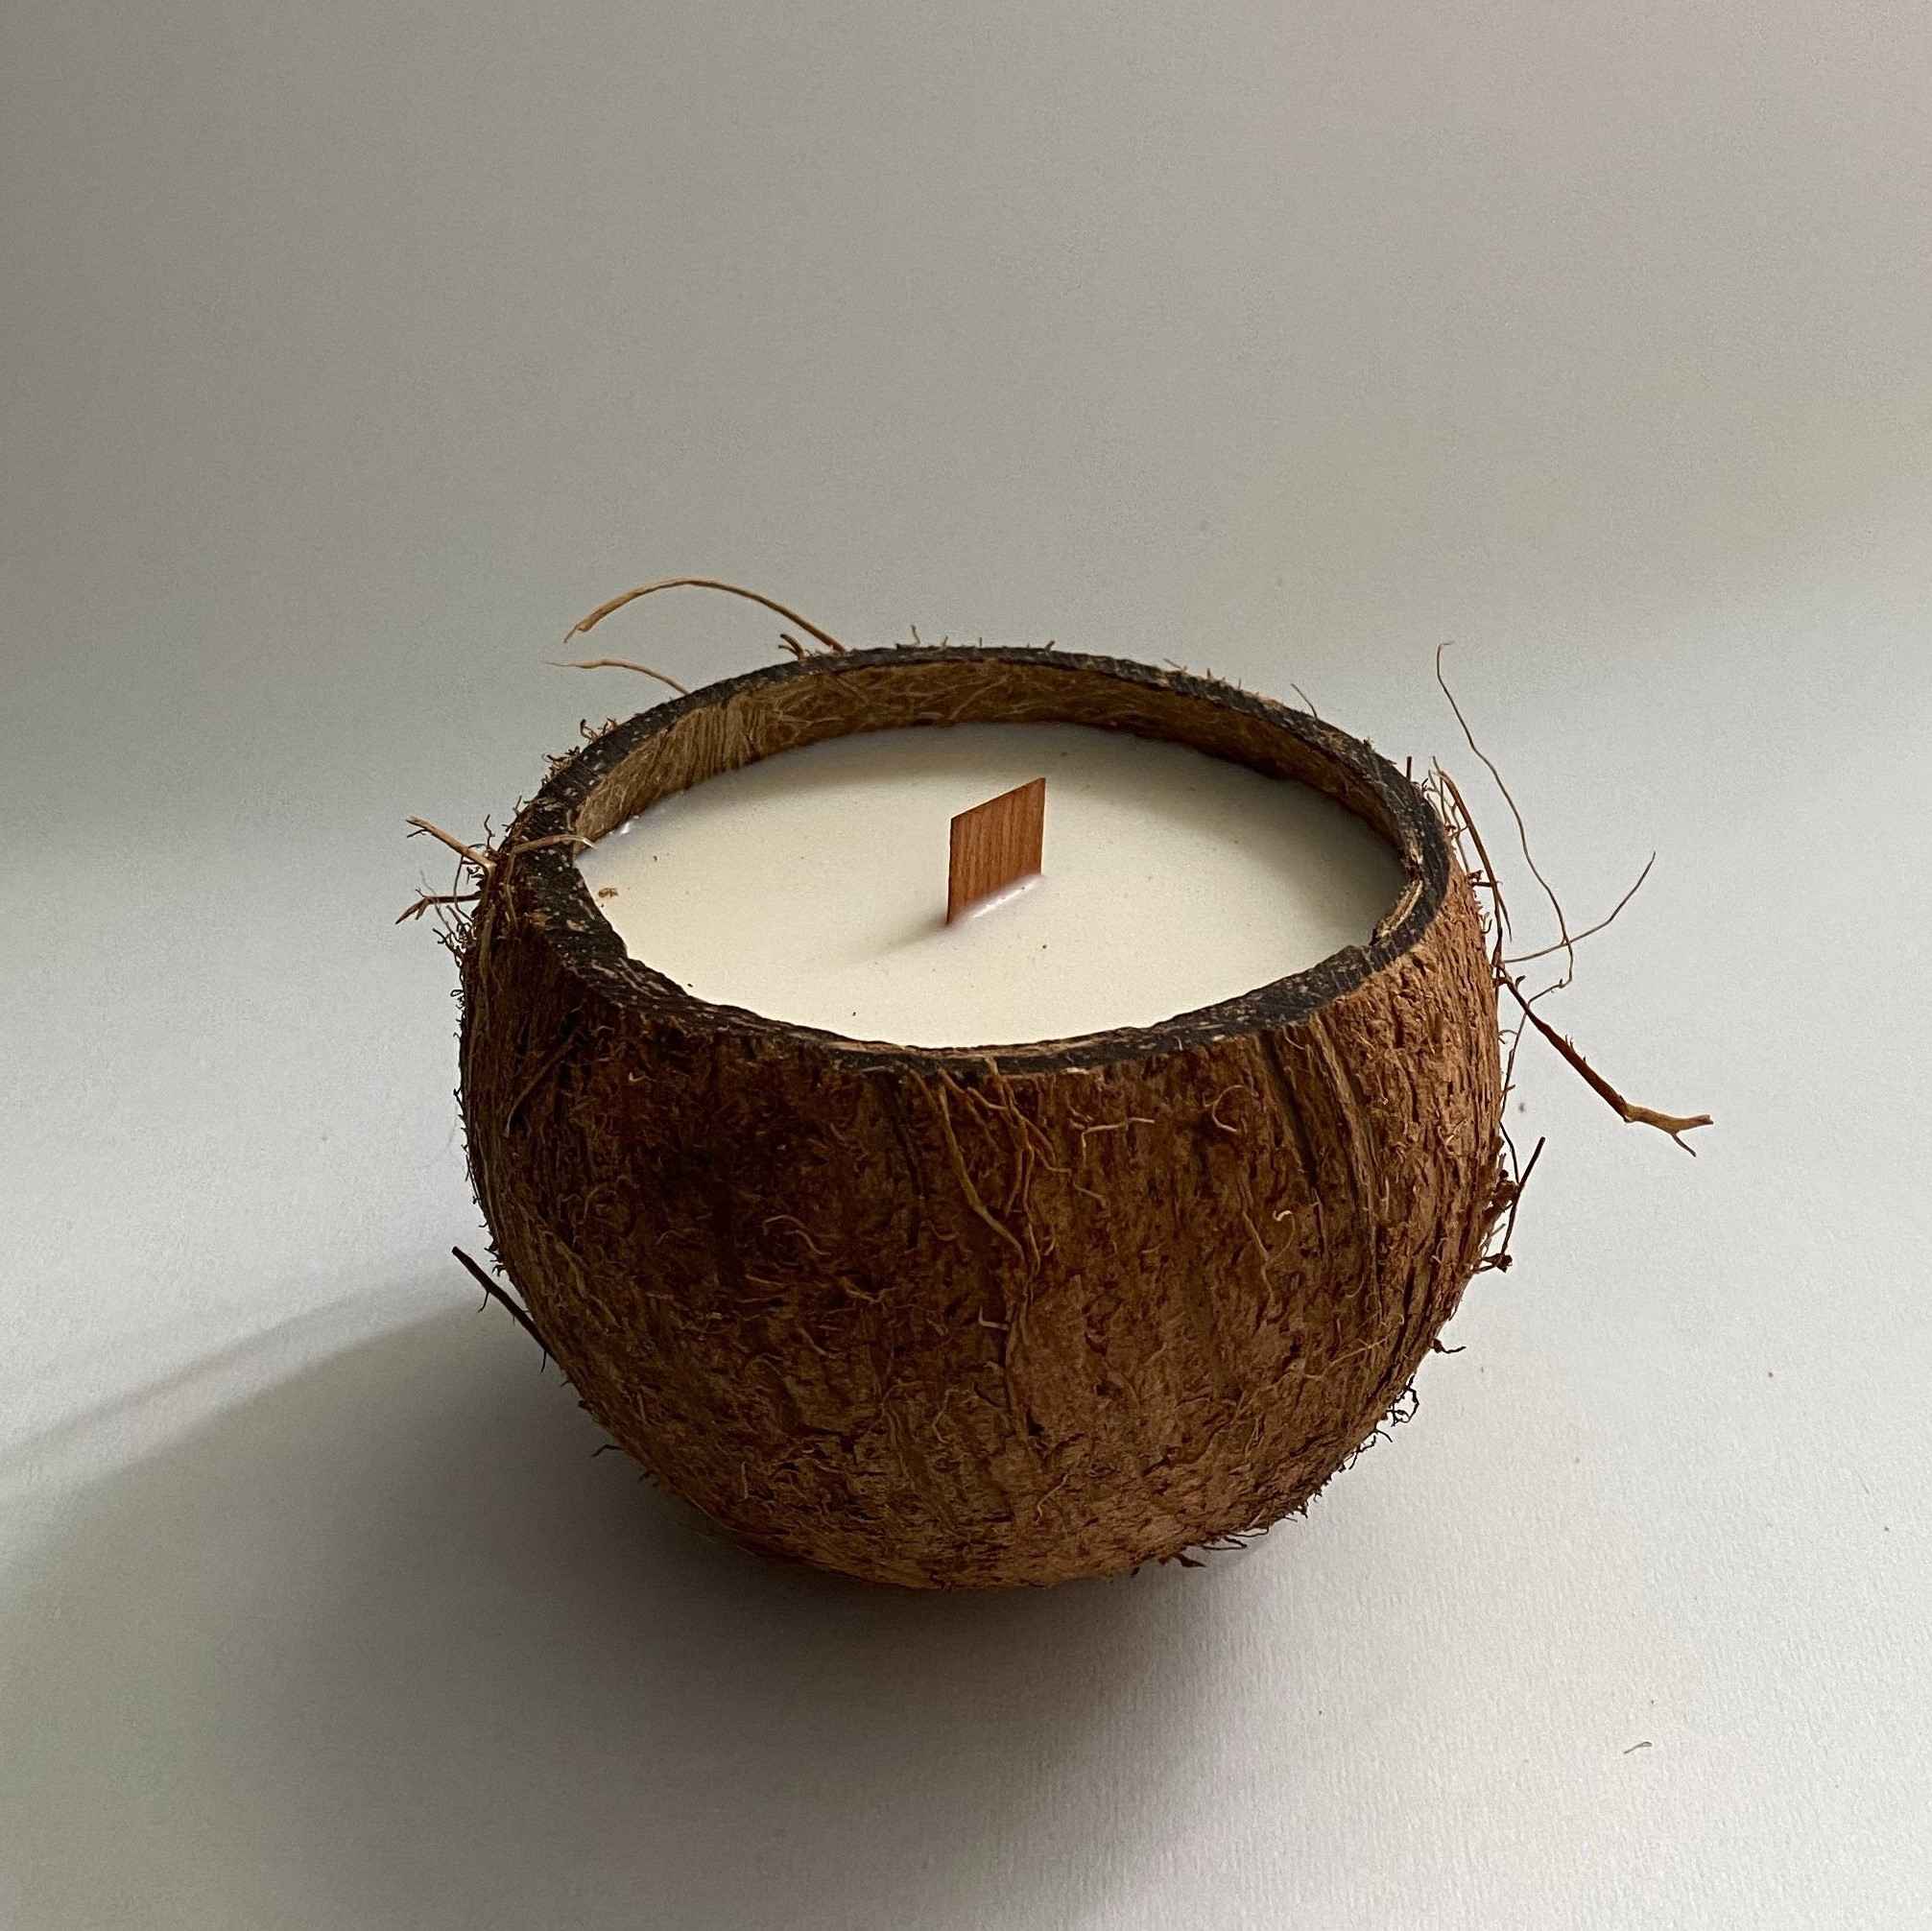 How to Make your own Coconut Wax Candle at home — Stone Candles